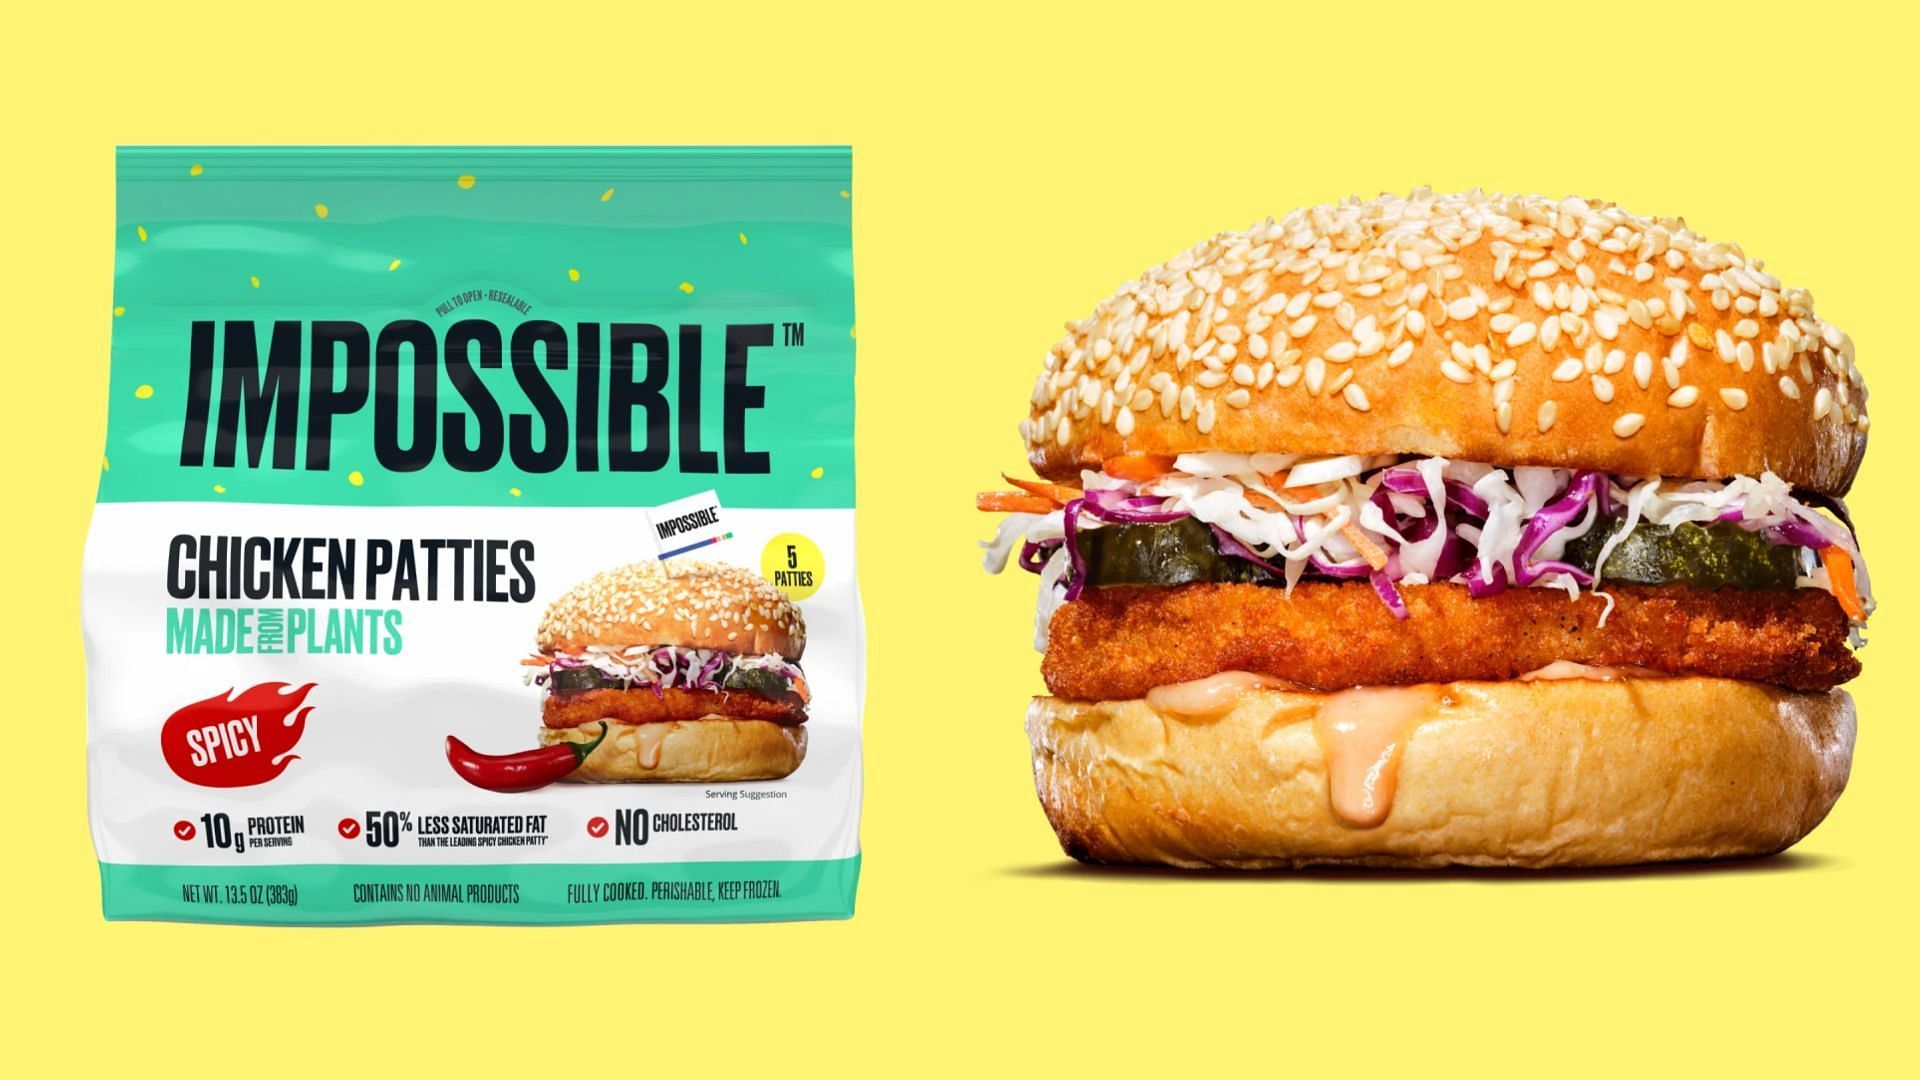 The new Impossible™ Spicy Chicken Patties (Image via Impossible Foods)